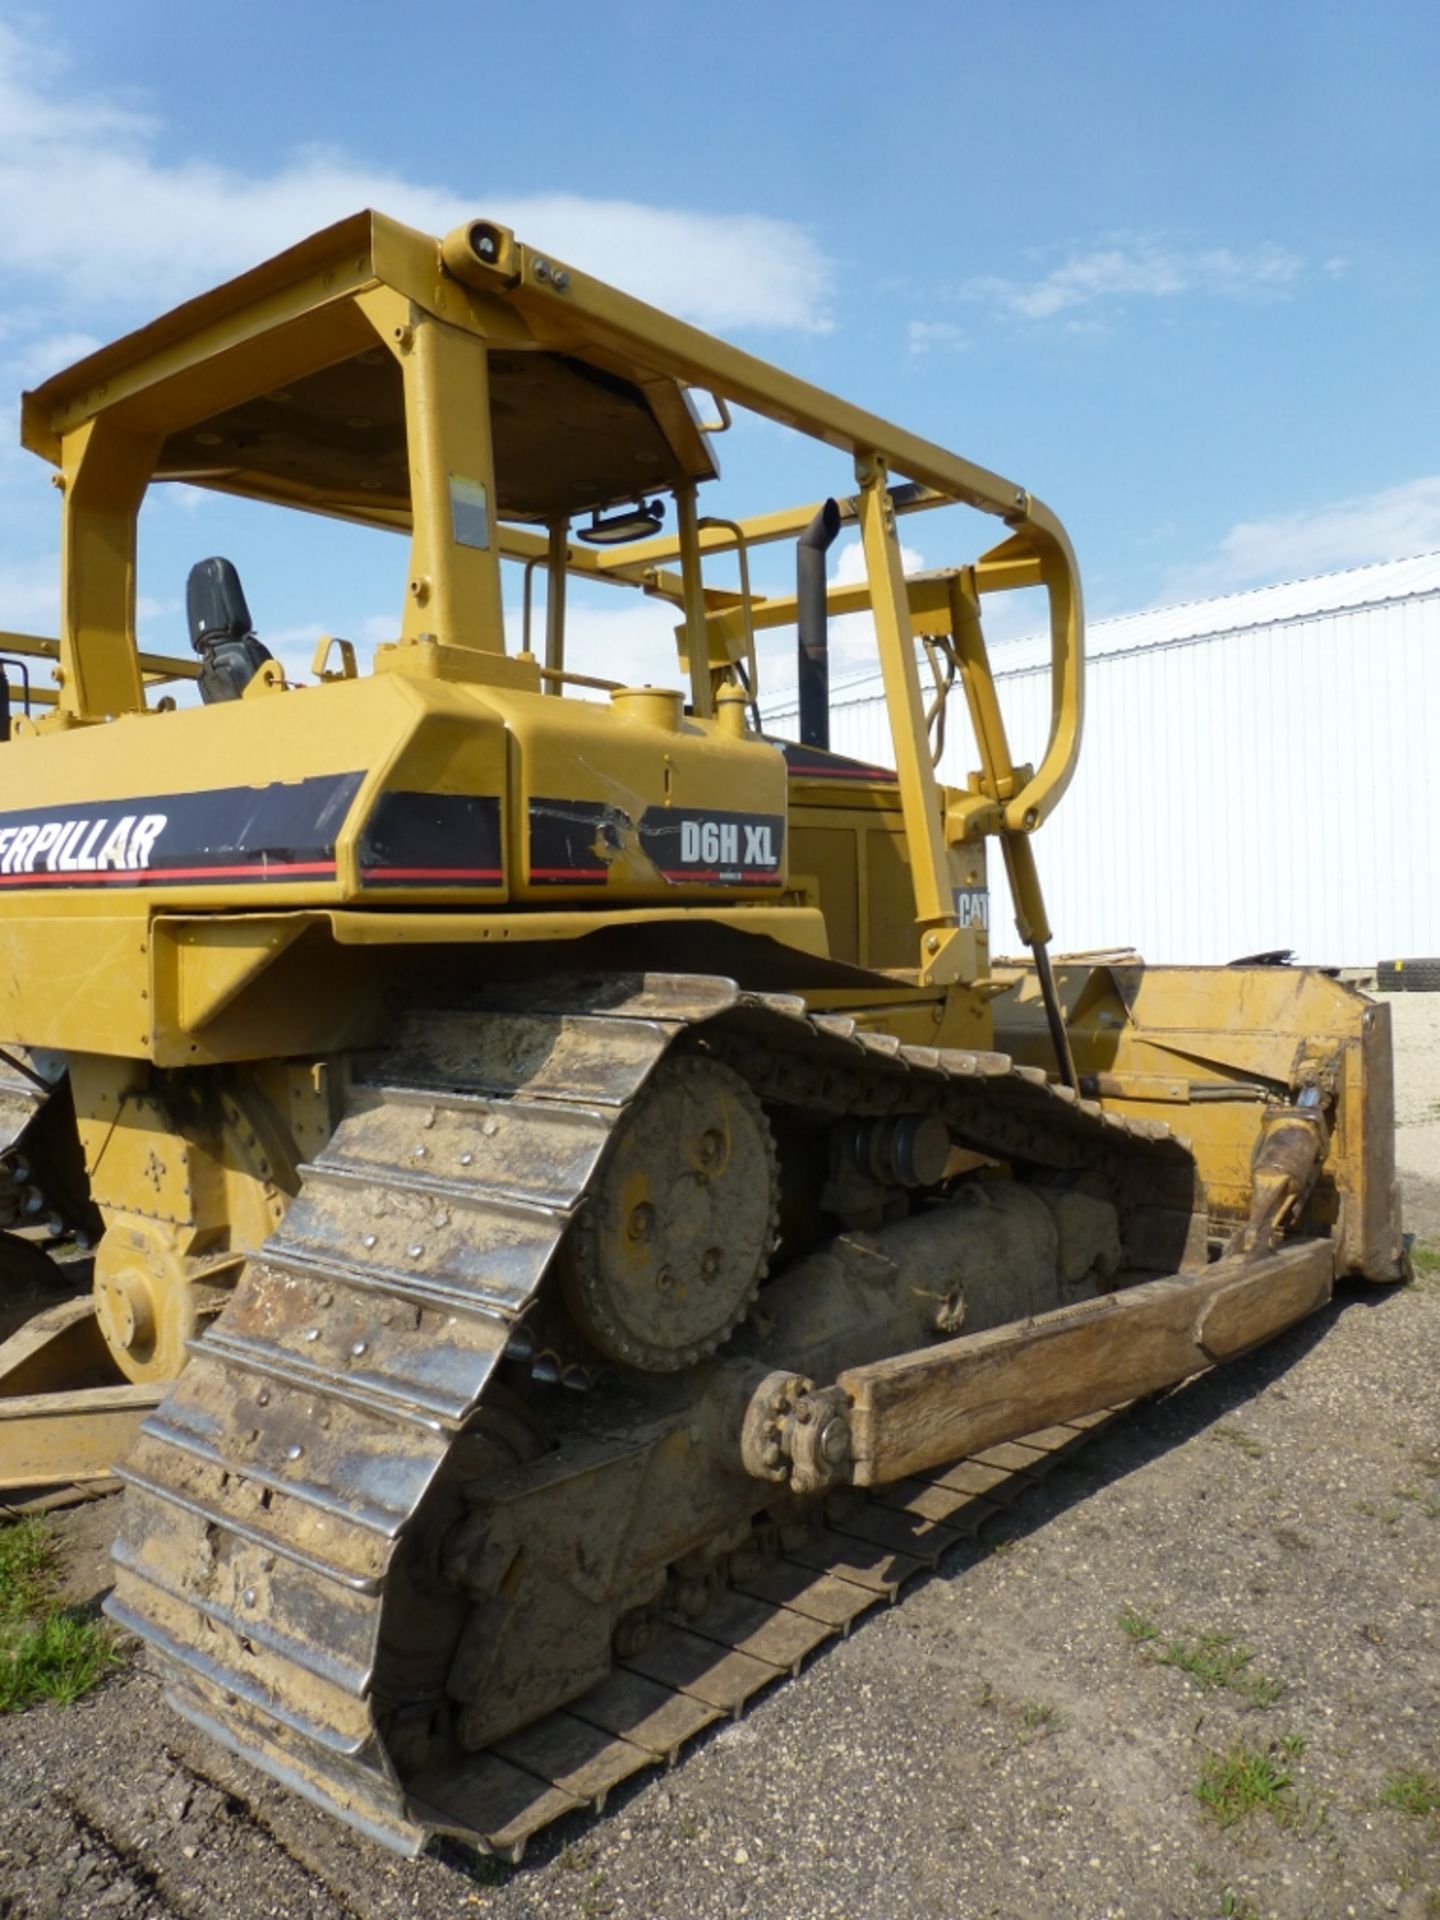 CAT D6H XL Series II, open ROPS, 30" pad. 139" blade. 17736 unverified hours. se:9kj0776 - Image 6 of 17